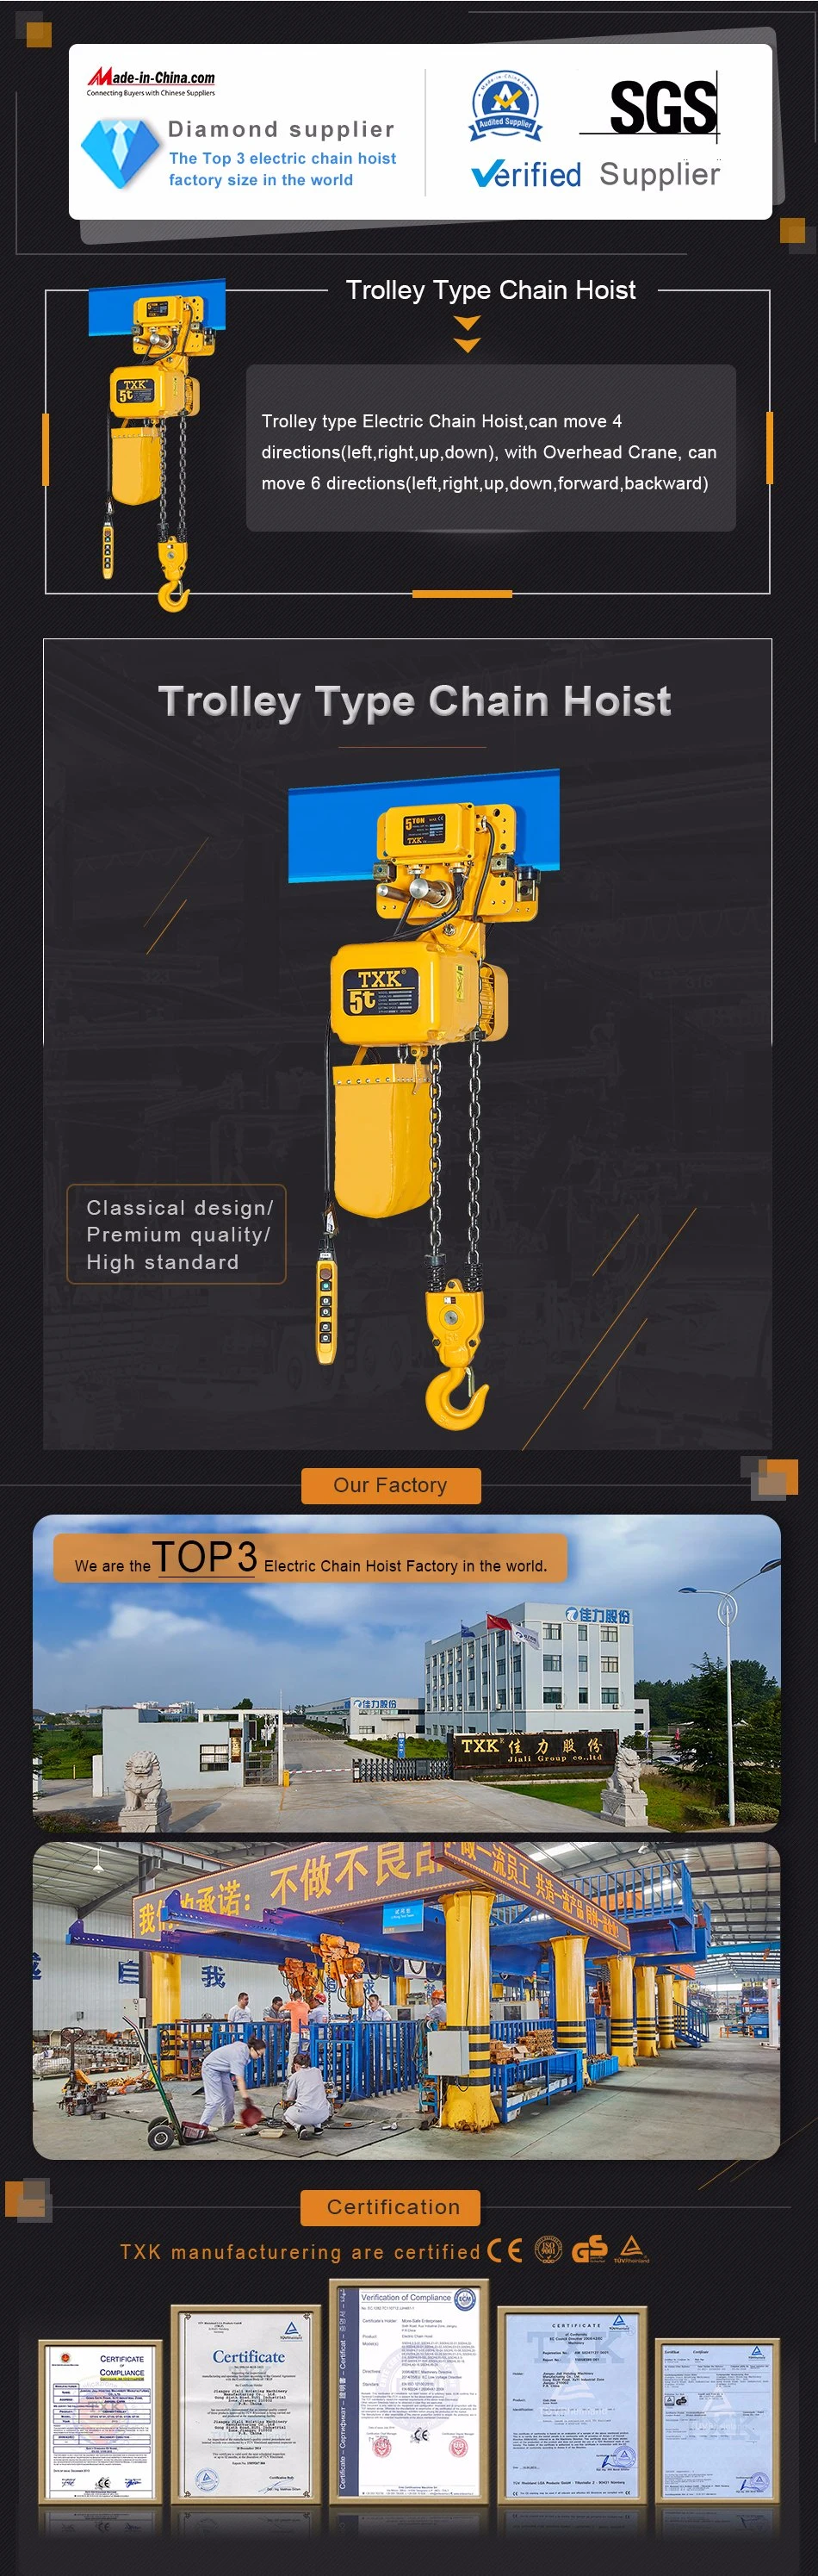 Outdoor Chain Hoist 5 Ton Single Speed M Series Electric Chain Hoist with 2 Chain Falls